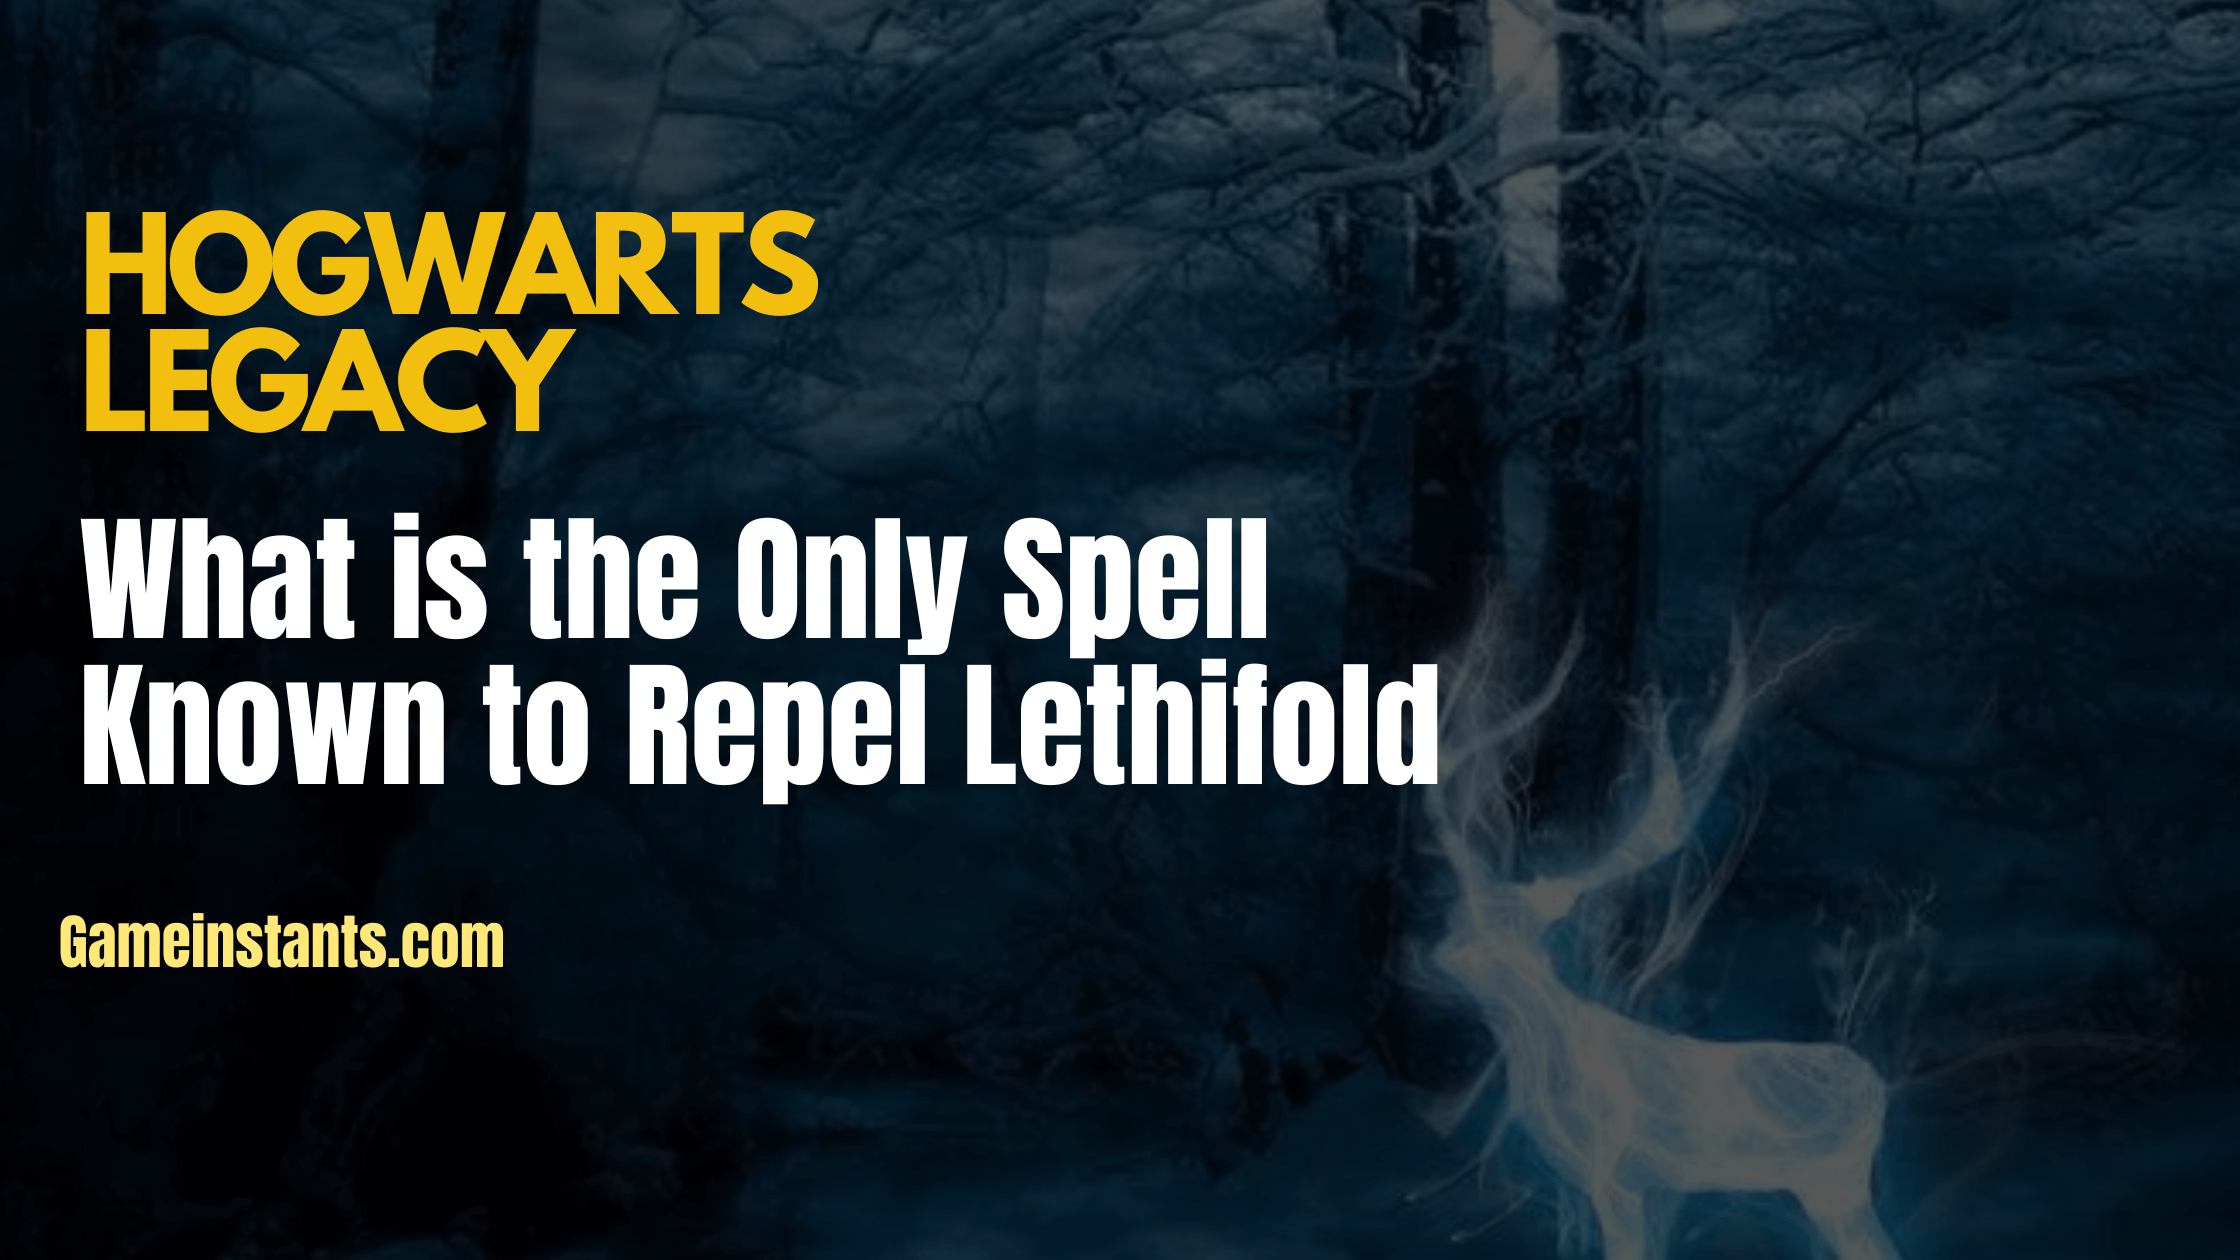 What is the Only Spell Known to Repel Lethifold